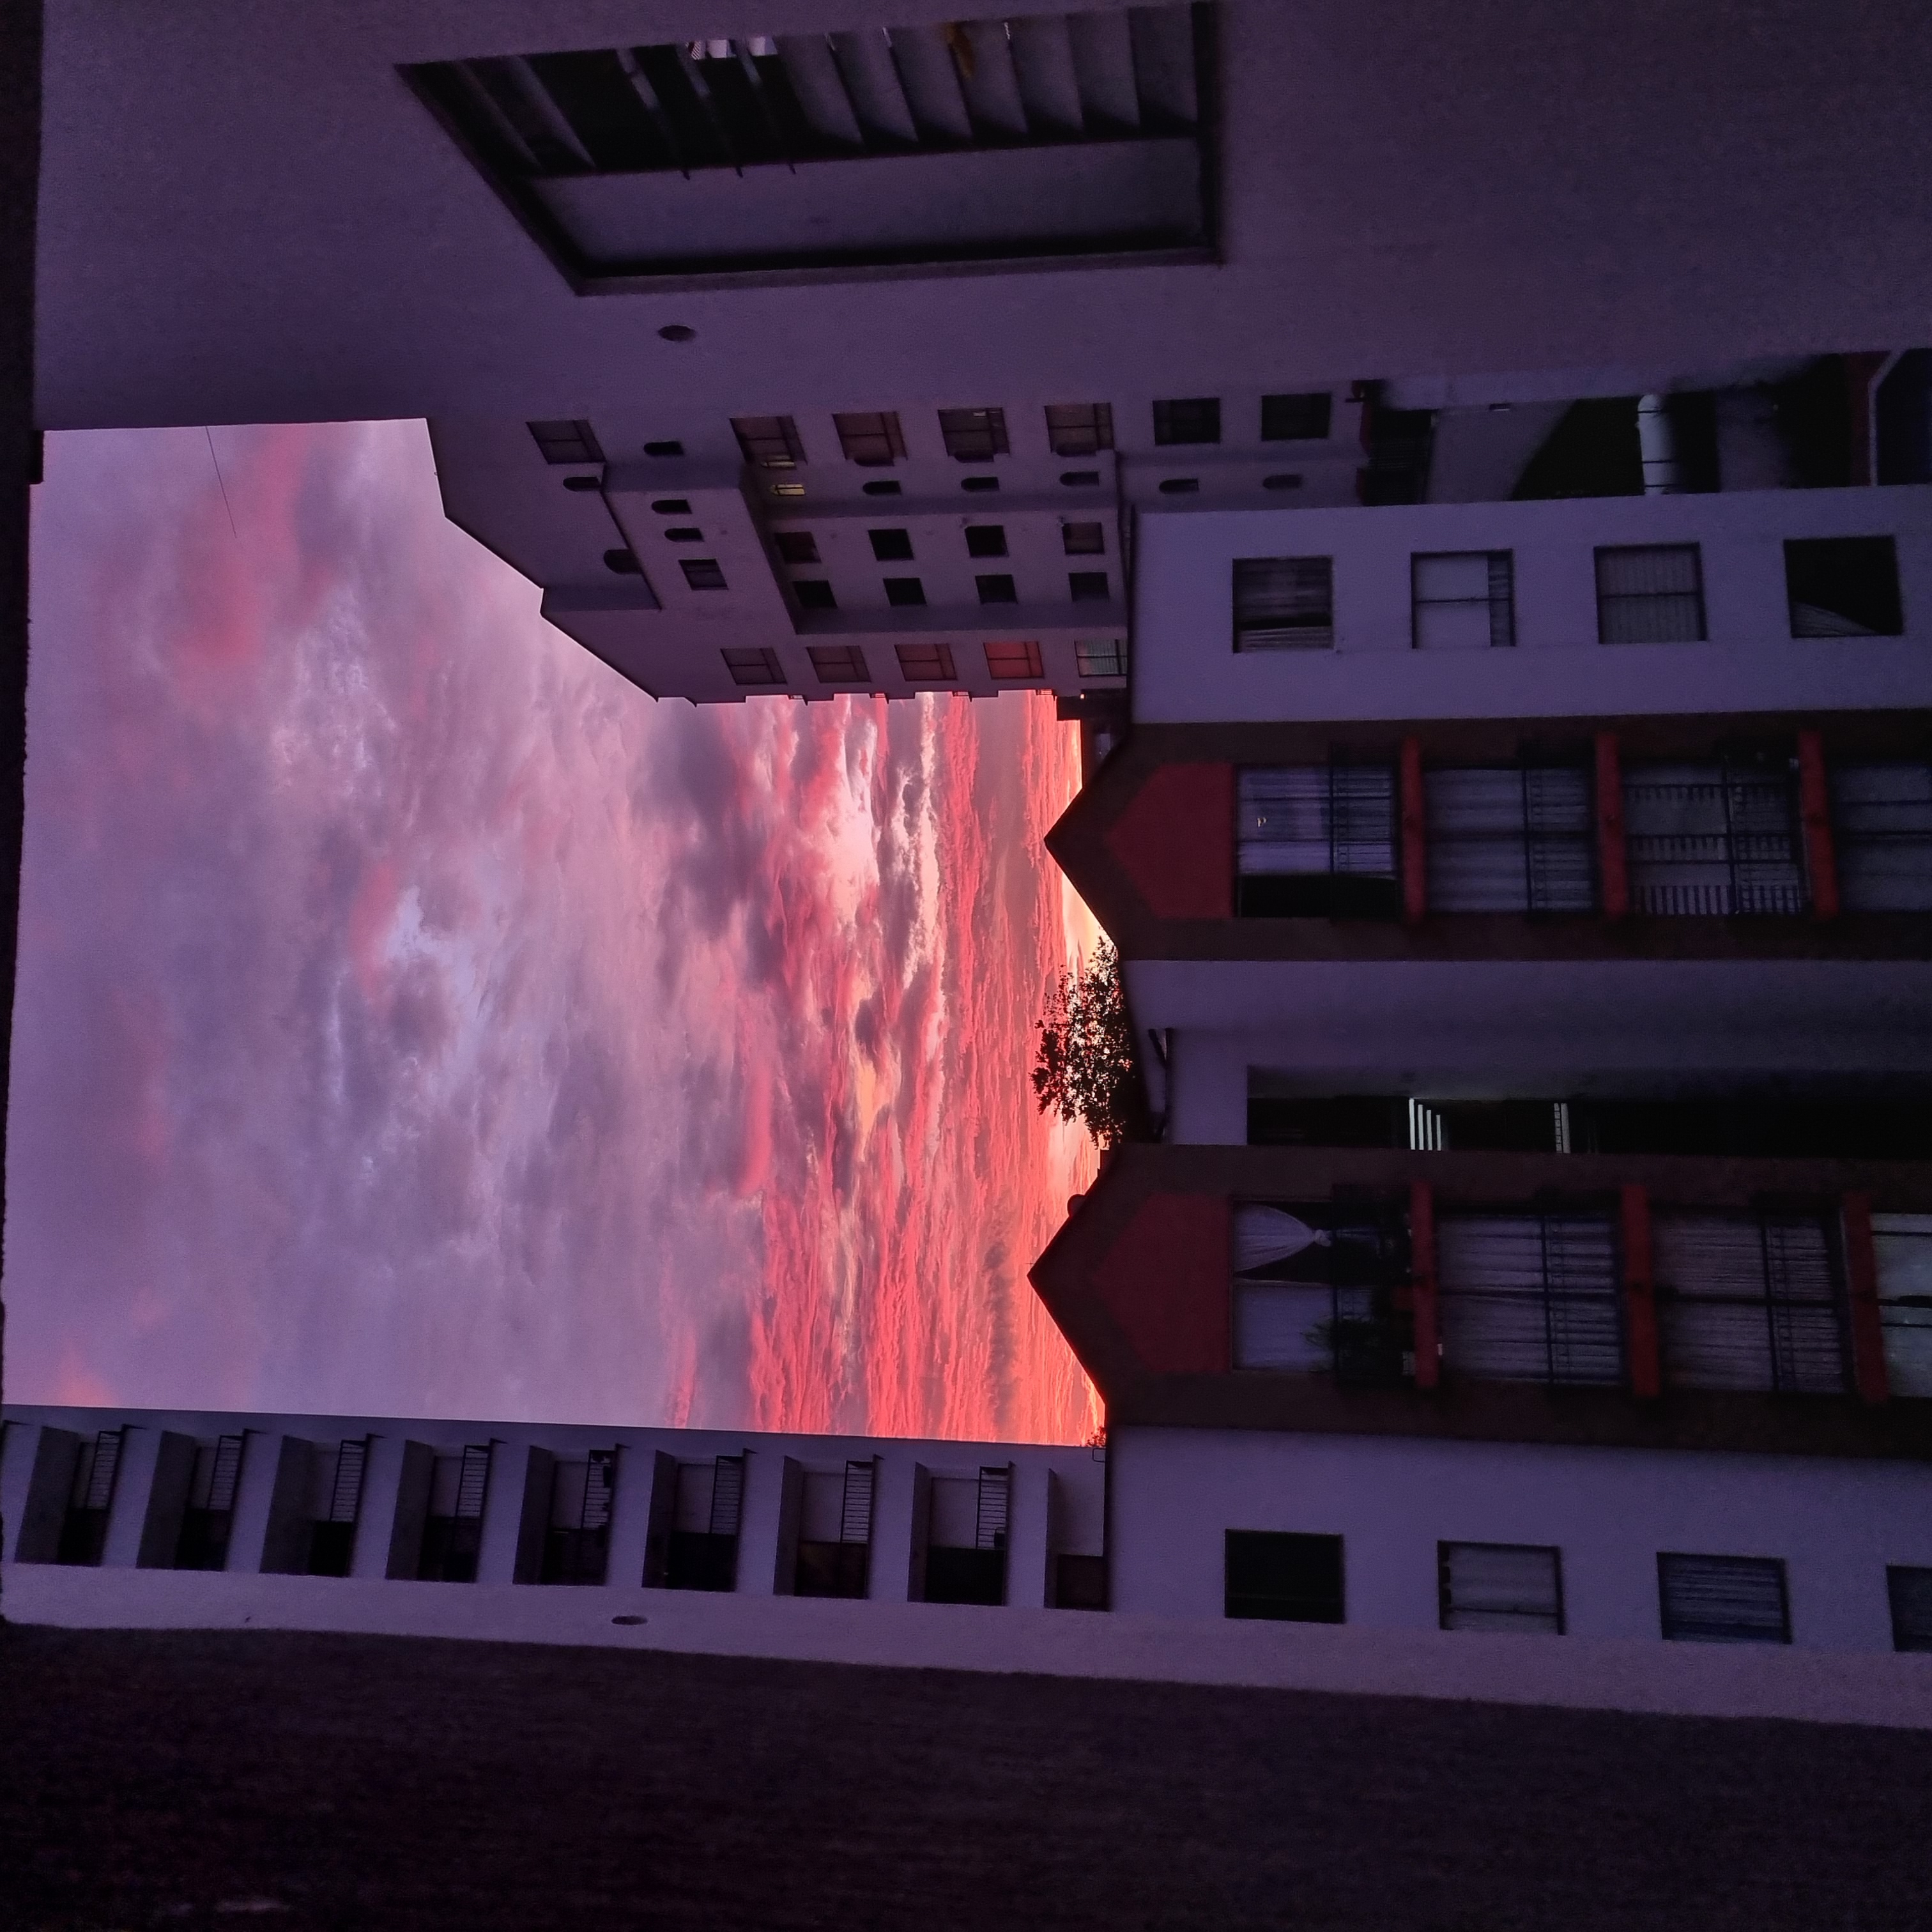 View of the sky at sunset. Purple and pink tones can be seen in the clouds that show between apartment buildings.